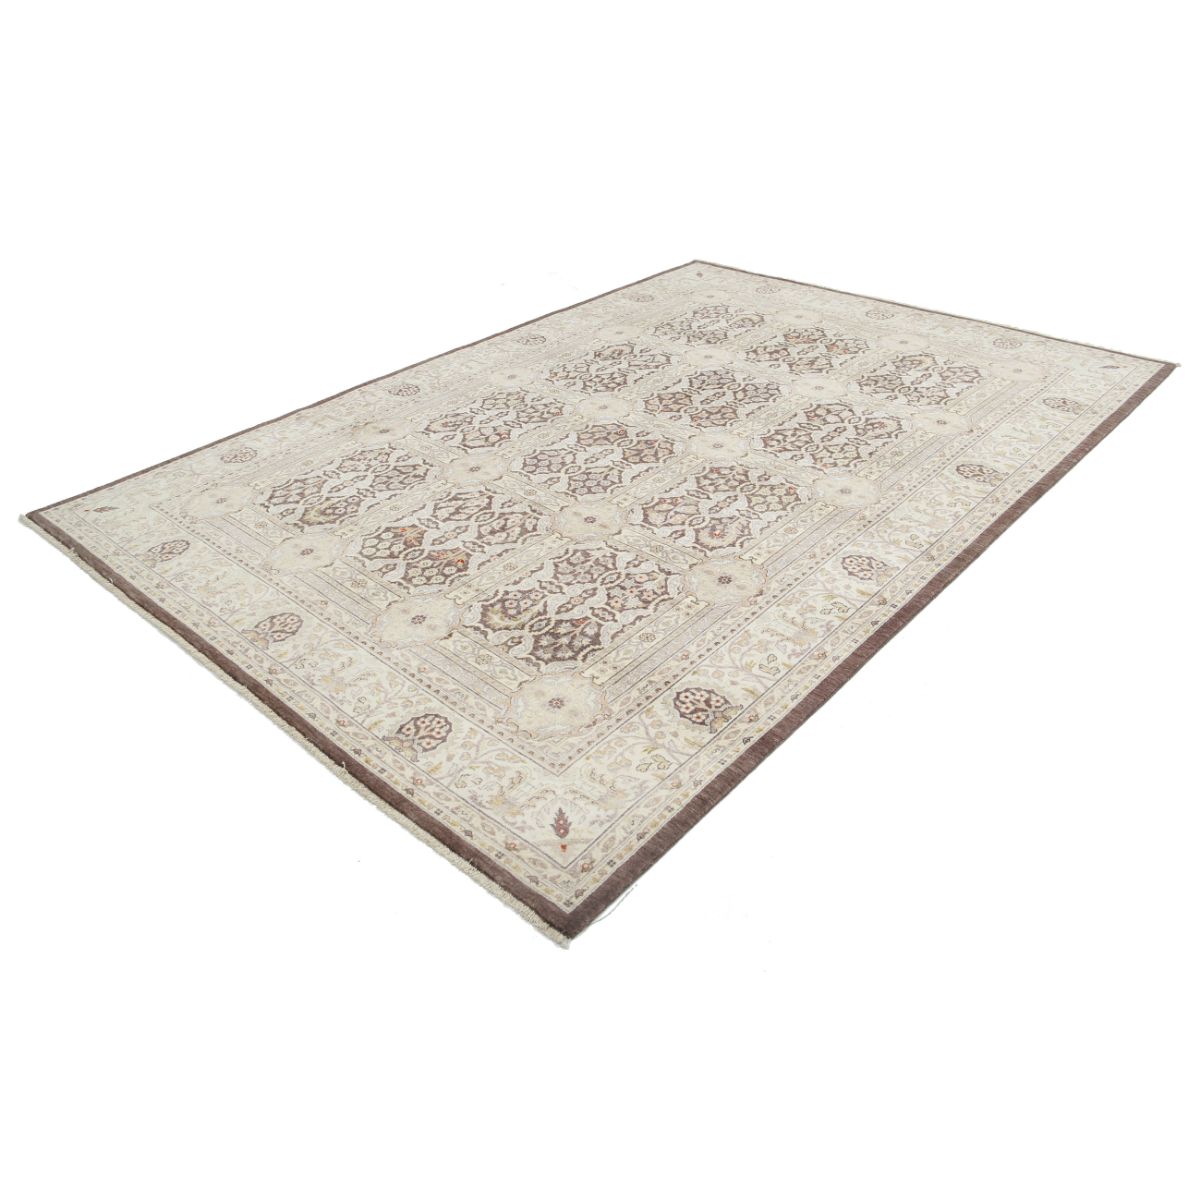 Ziegler 7'0" X 10'0" Wool Hand-Knotted Rug